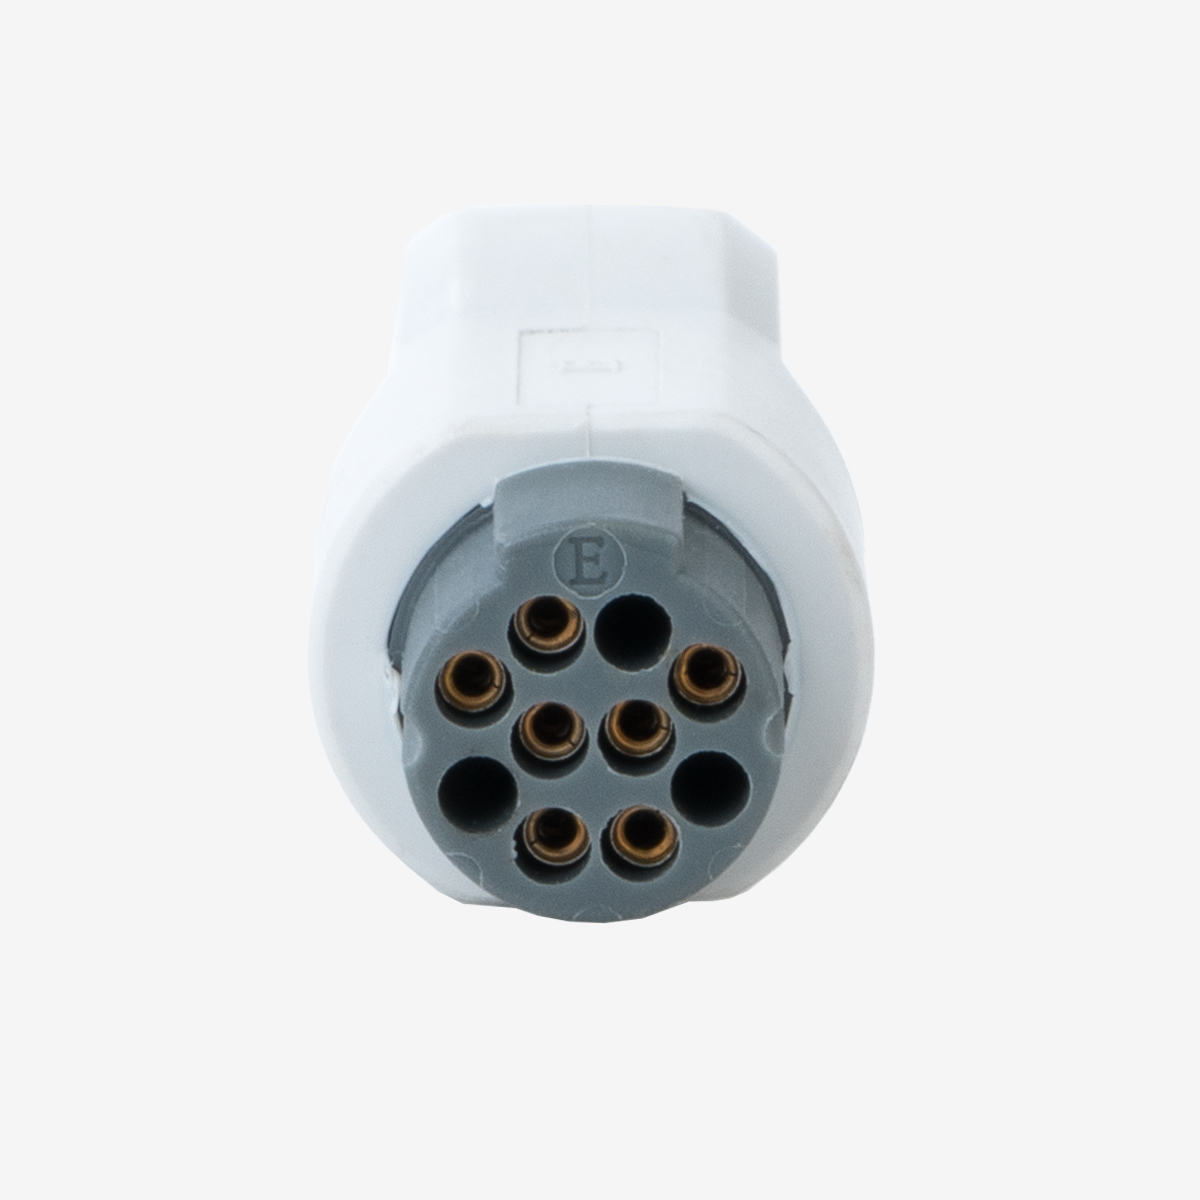 White SpO2 connector with gray tip and female front